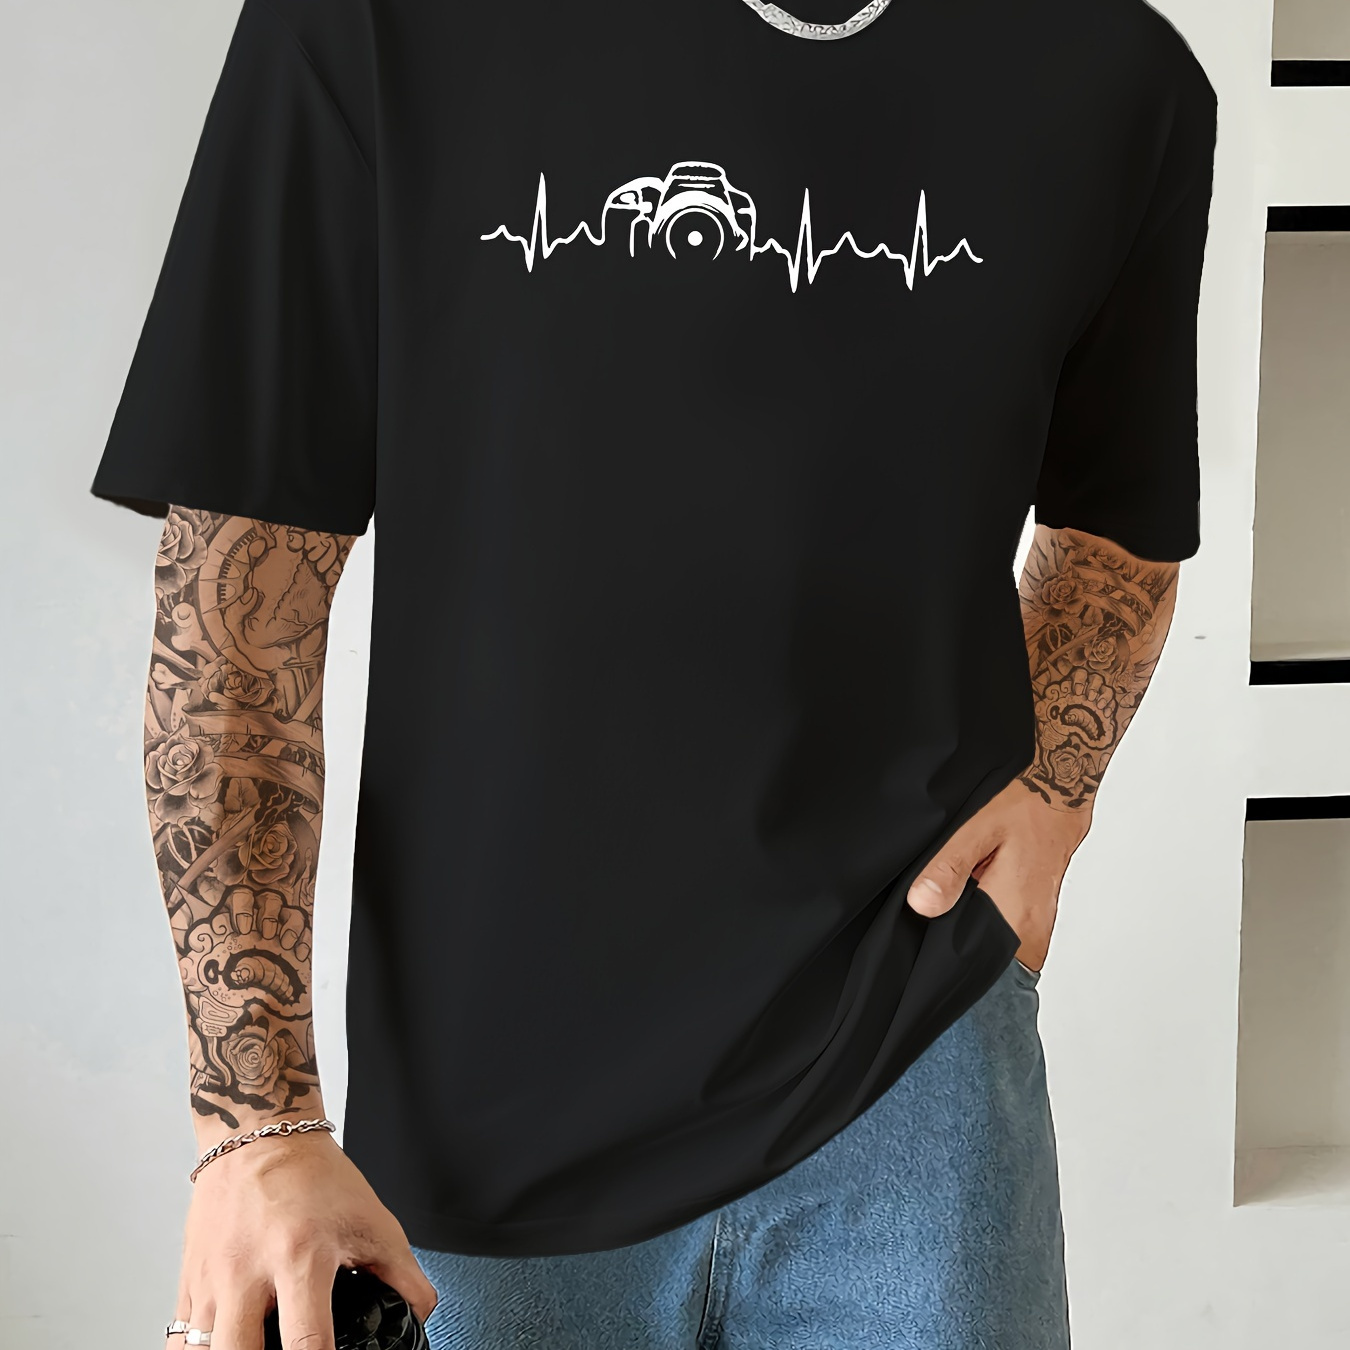 

Camera And Heartbeat Print Short Sleeve Tees For Men, Casual Quick Drying Breathable T-shirt, Round Neck T-shirt For All Seasons